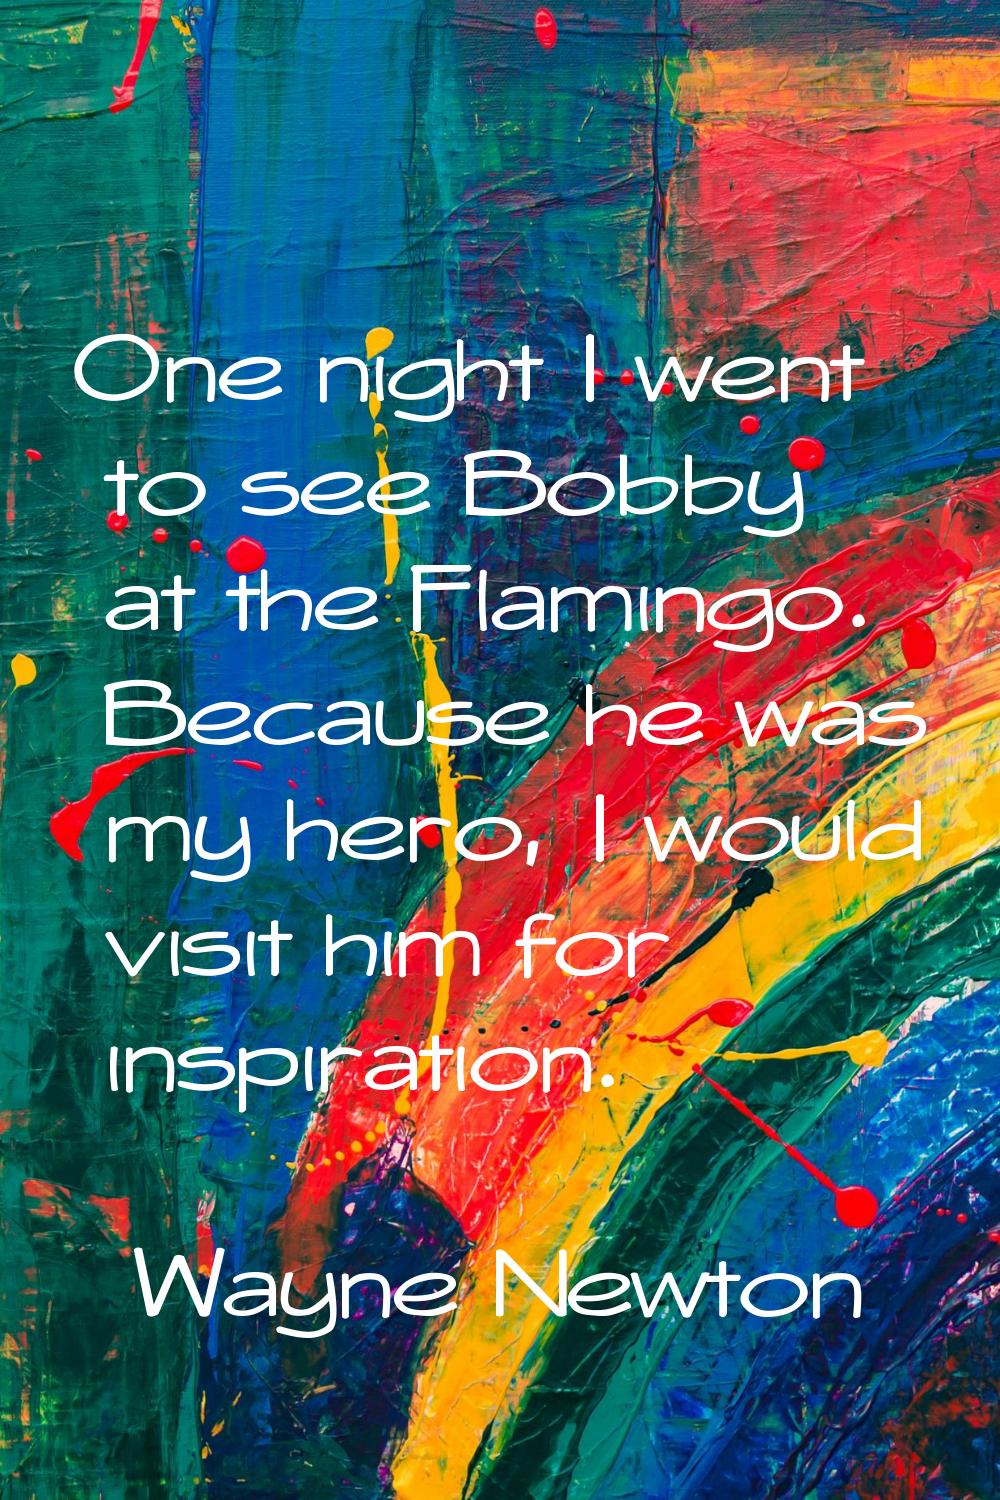 One night I went to see Bobby at the Flamingo. Because he was my hero, I would visit him for inspir